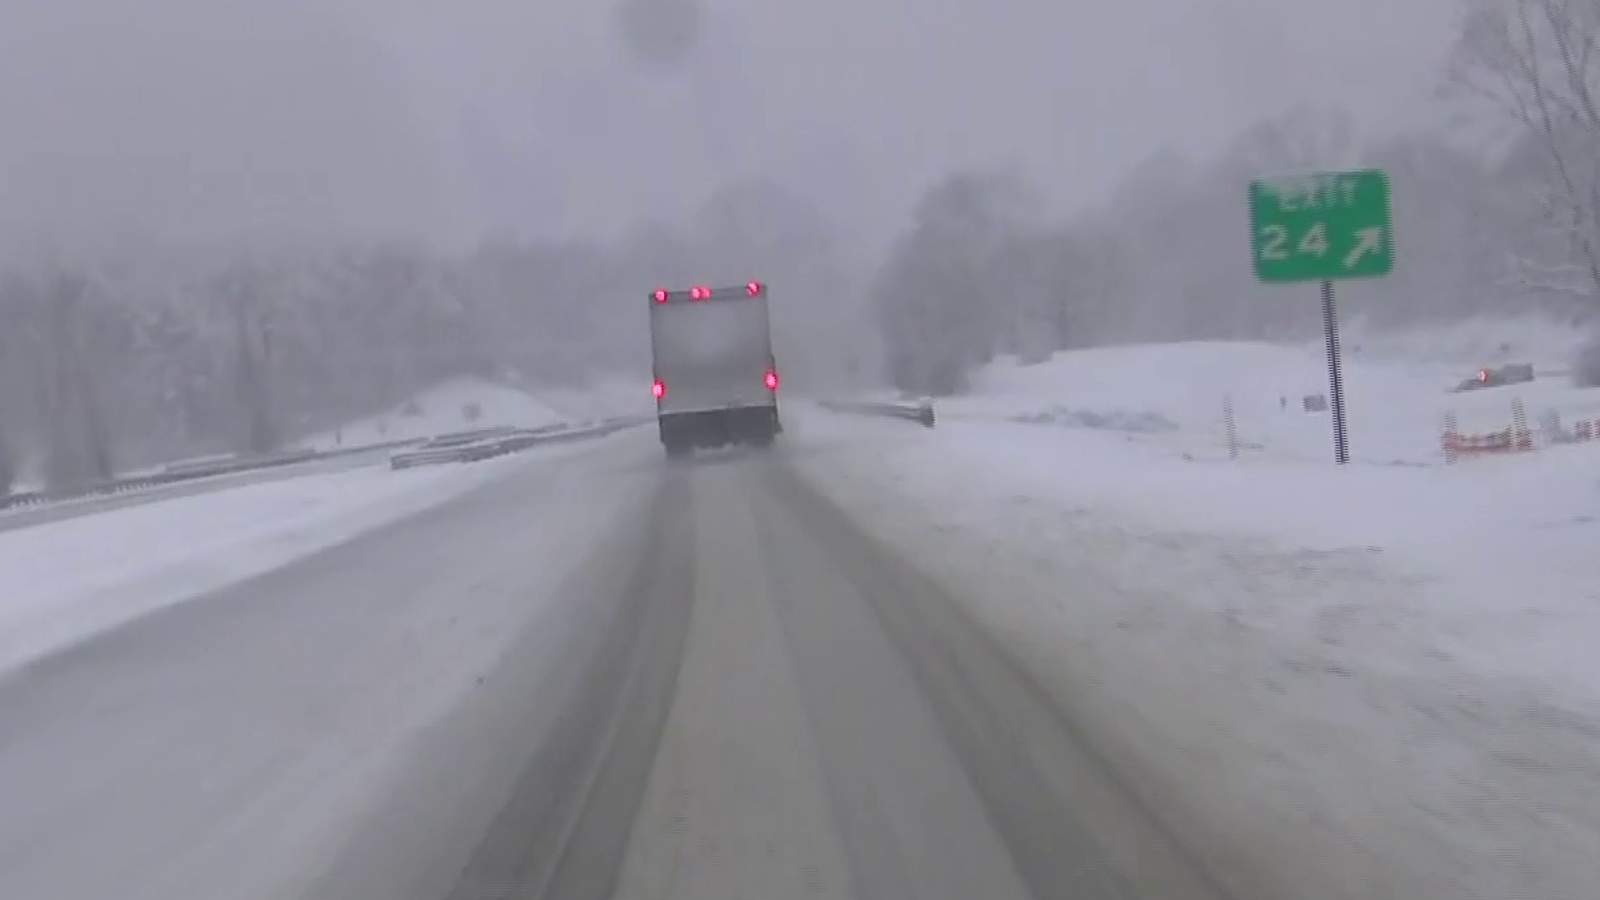 VSP responded to 362 traffic crashes, 321 disabled vehicles across Virginia during winter storm